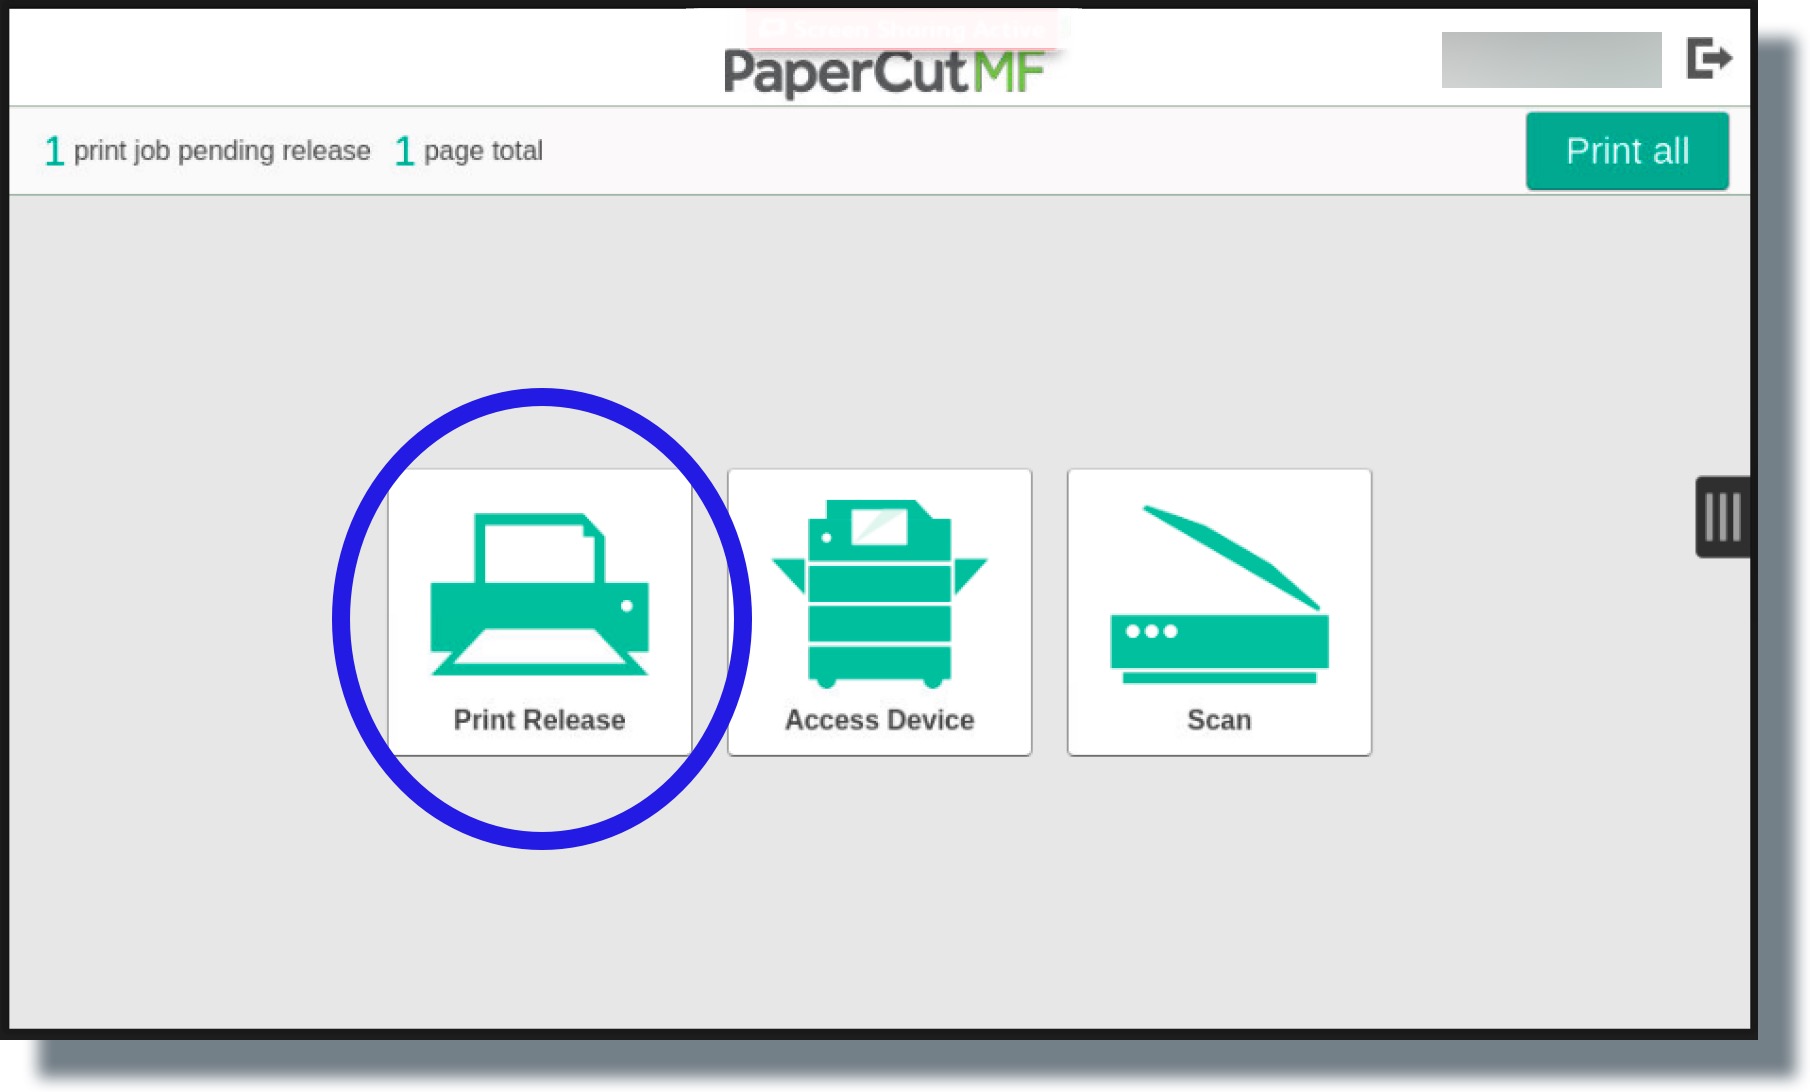 Tap 'Print Release' to display your print jobs